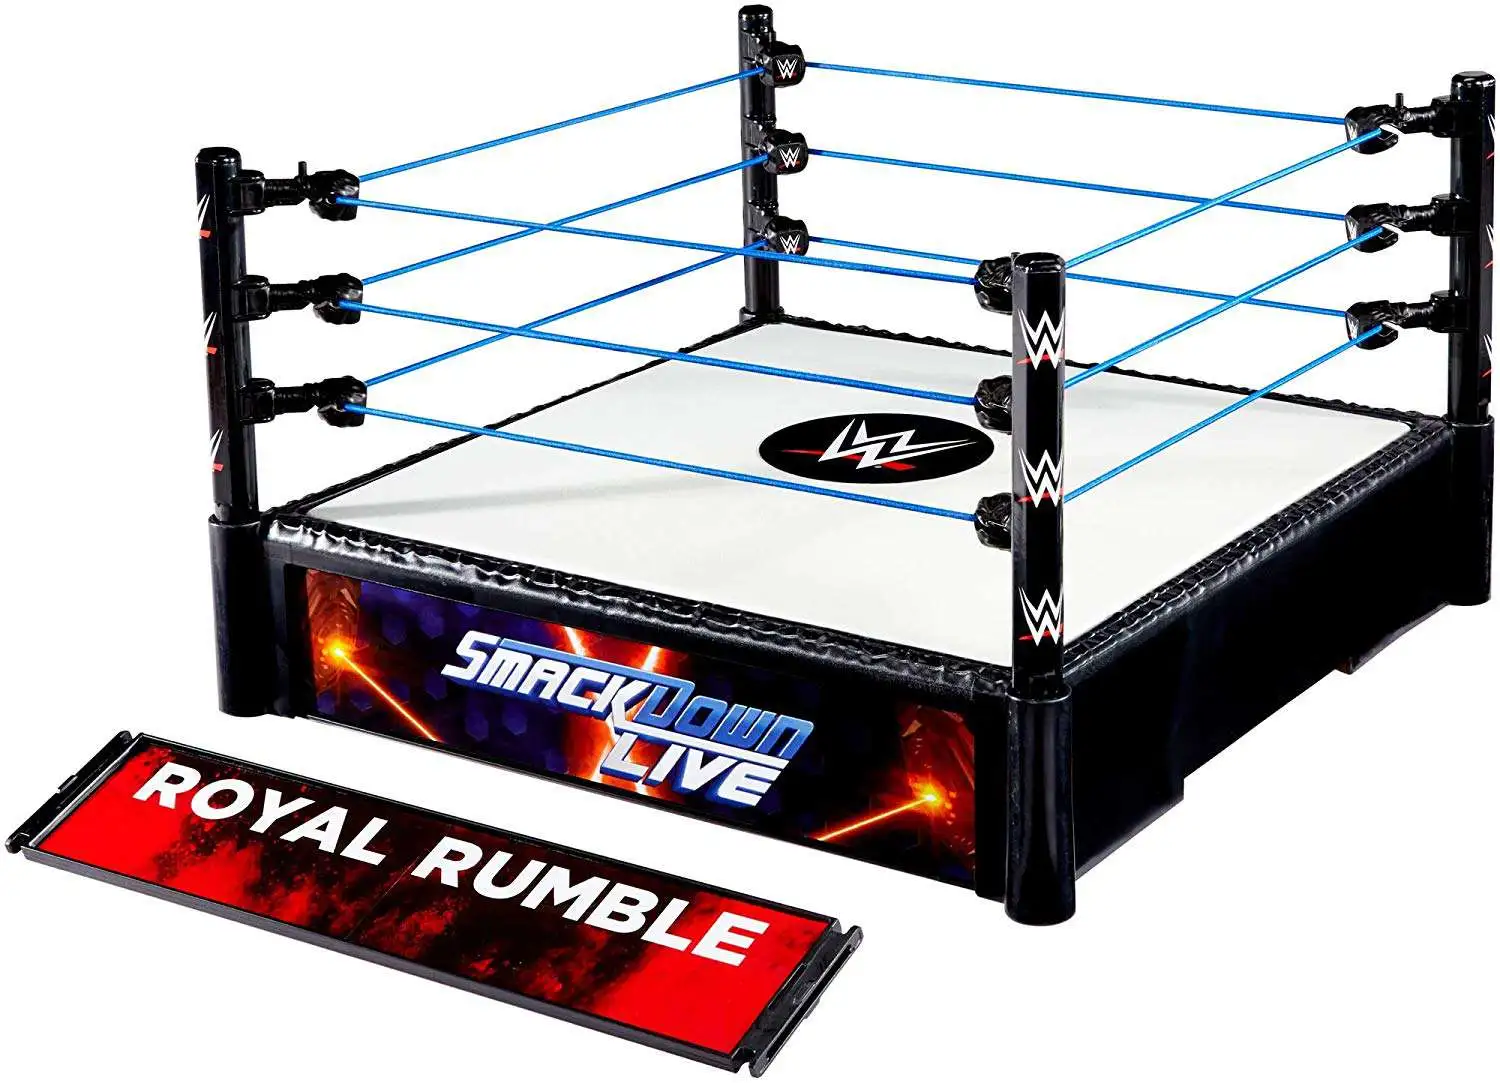 WWE Superstar Ring Smackdown & Royal Rumble 2 Events in 1 Mattel 2019 for sale online 